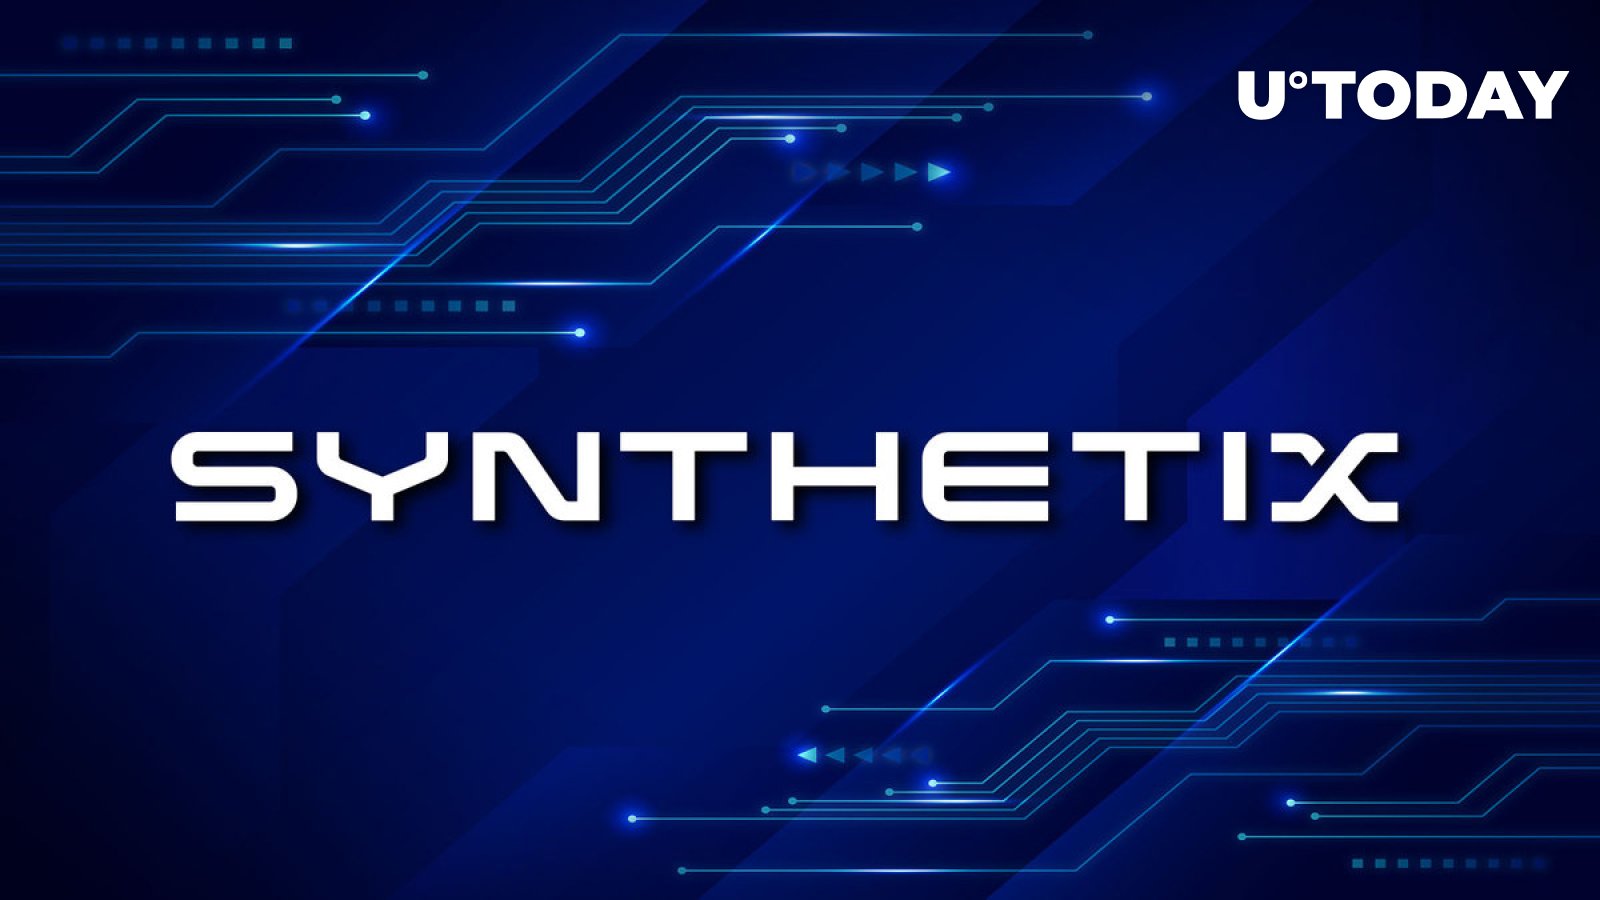 Synthetix (SNX) Gets Major Overhaul With This Deflationary Upgrade